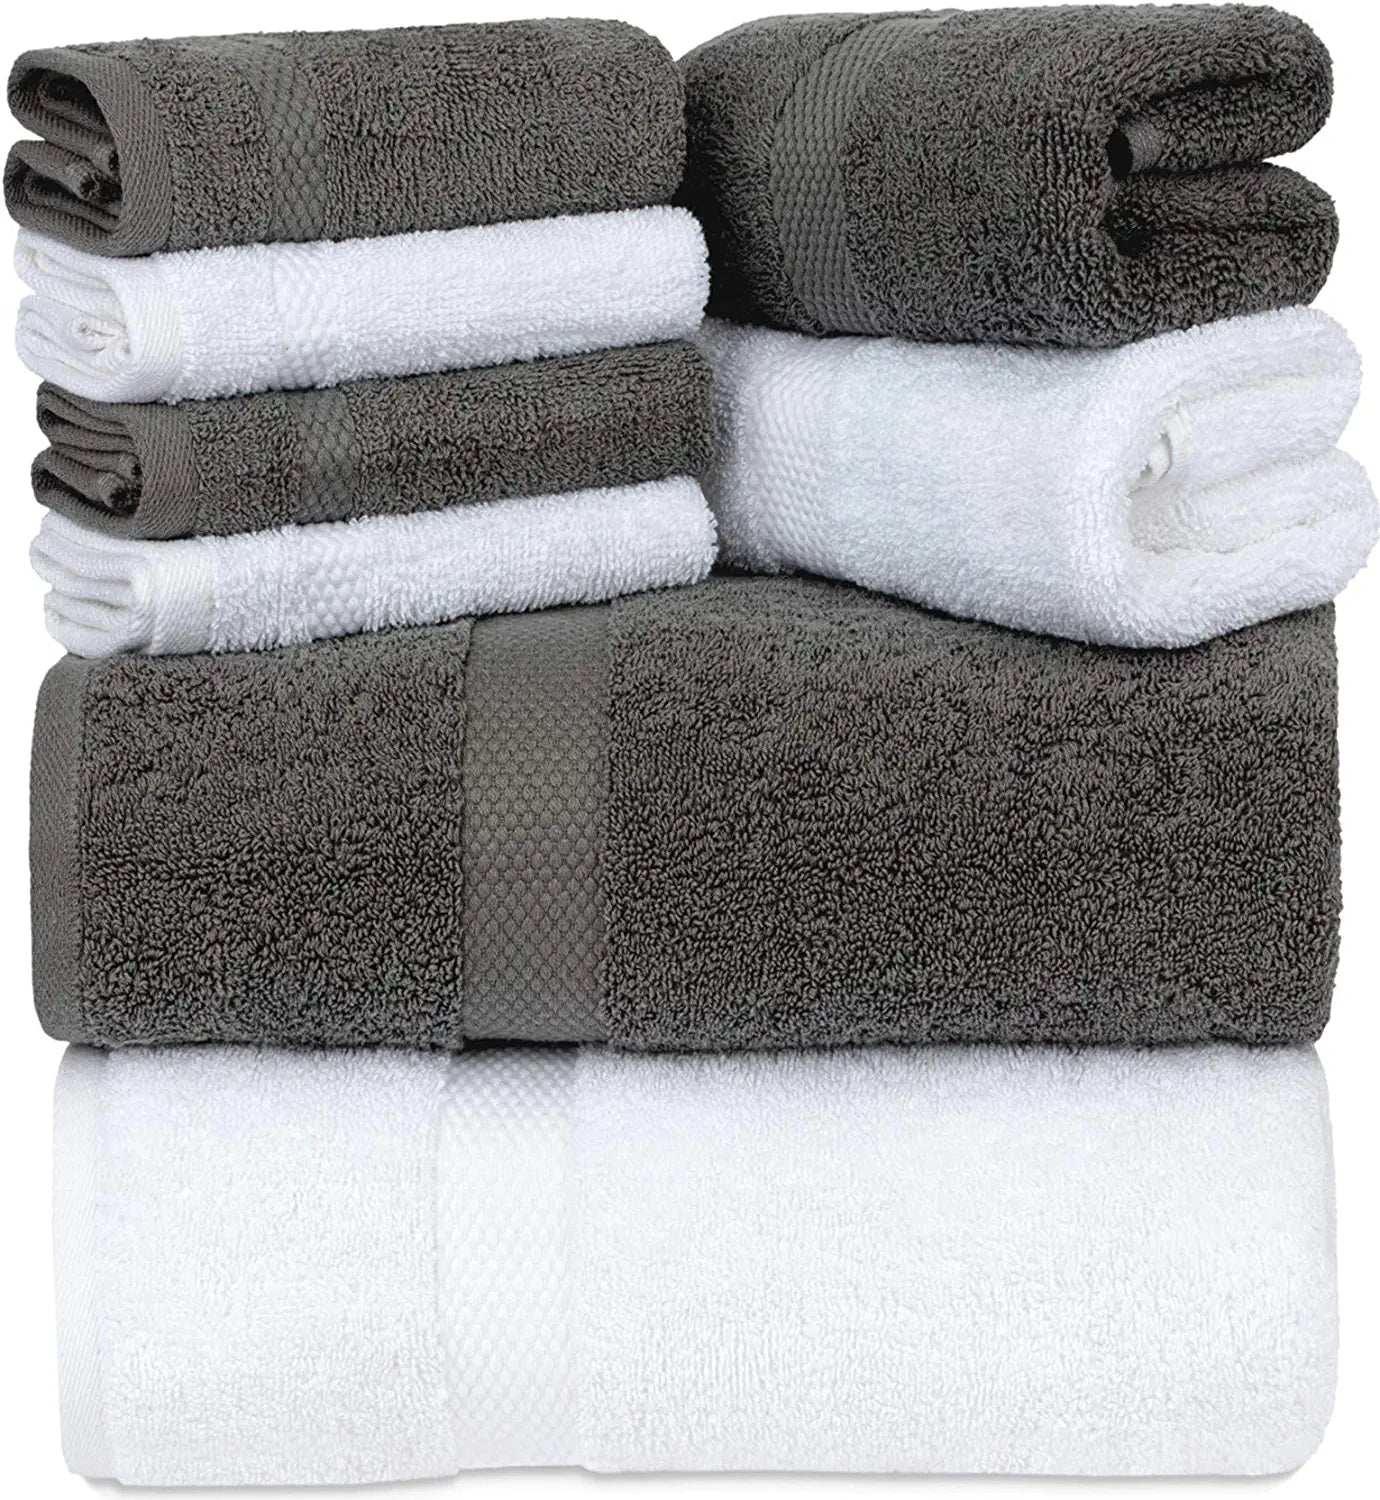 8Pc Grey and White Towel Set